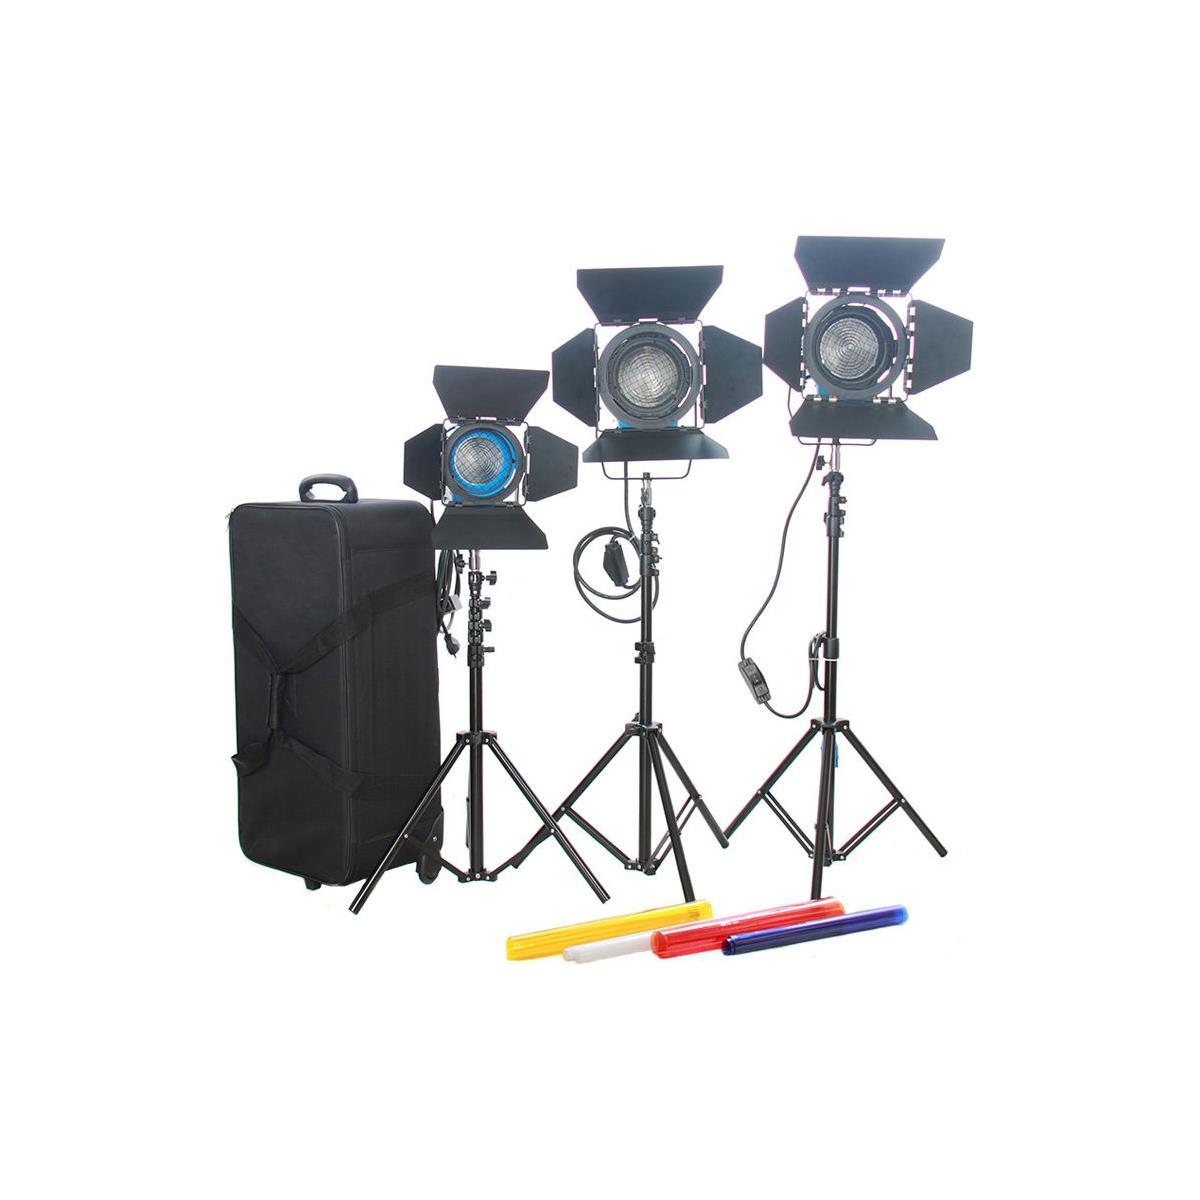 Image of Came-TV Fresnel Tungsten Video Spot Lights